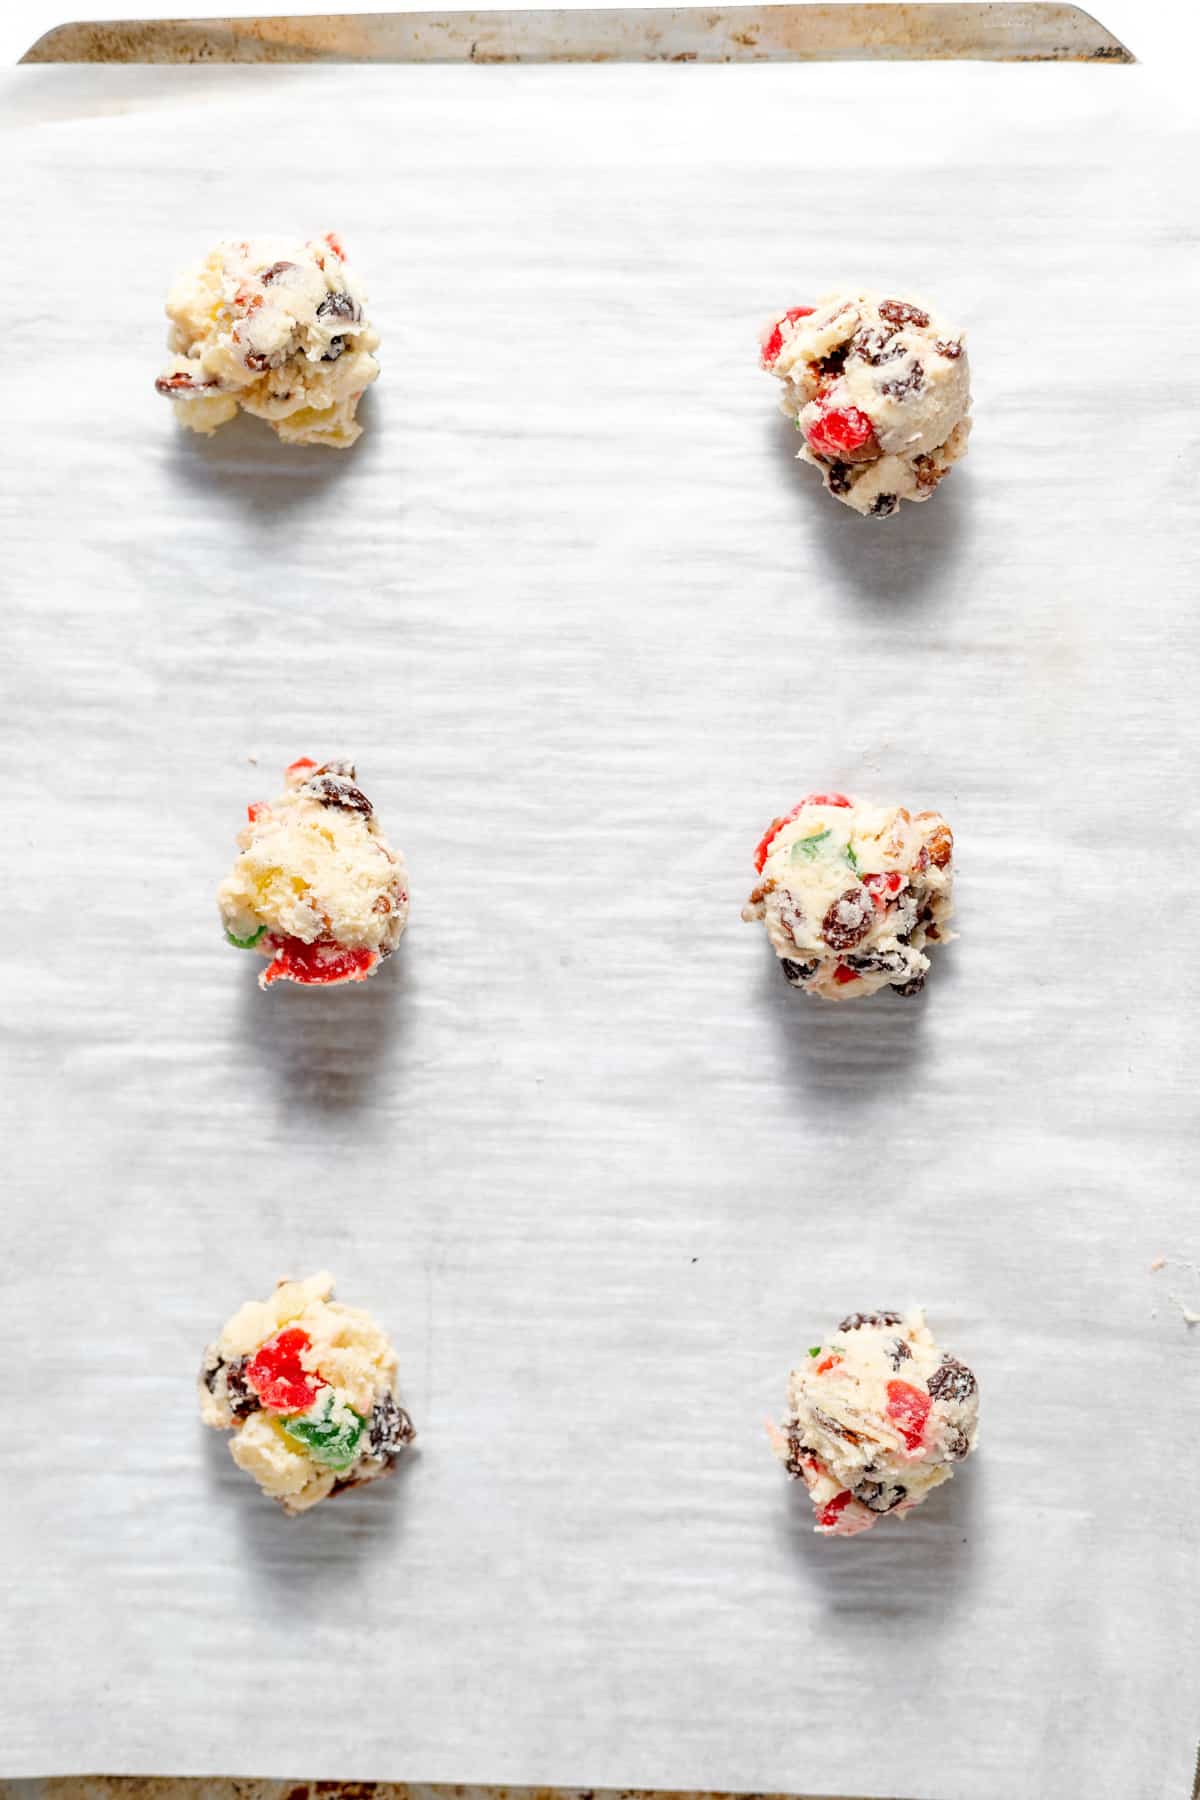 Six balls of fruitcake cookie dough on a parchment lined baking sheet before baking.